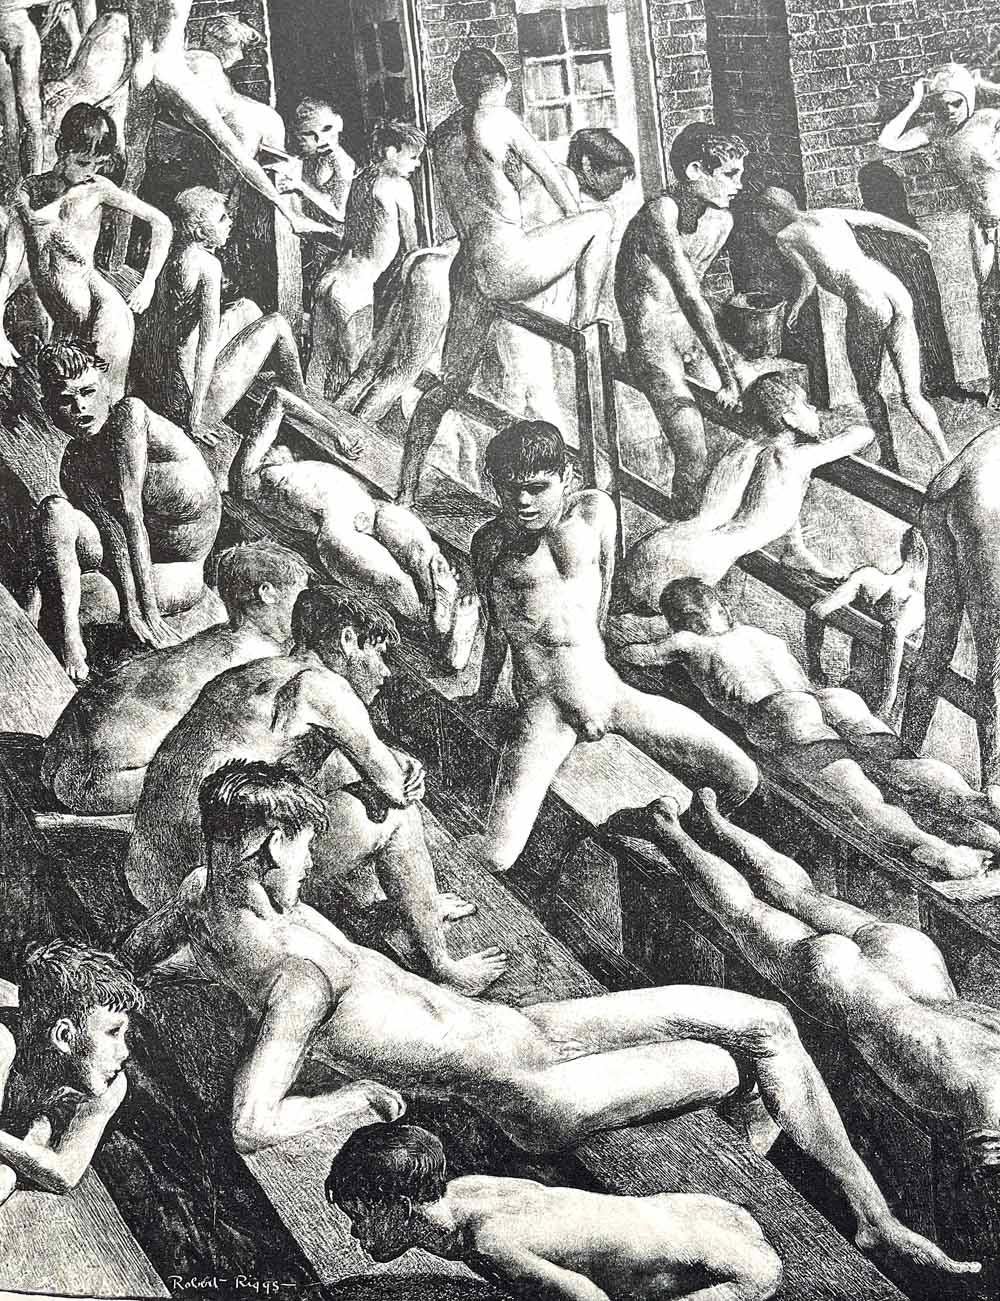 This classic and rare print, made at a time when men and boys were much less self-conscious of their nudity at the bath or the pool, depicts a teeming crowd of male youth in and around a public pool in the historic Germantown neighborhood of